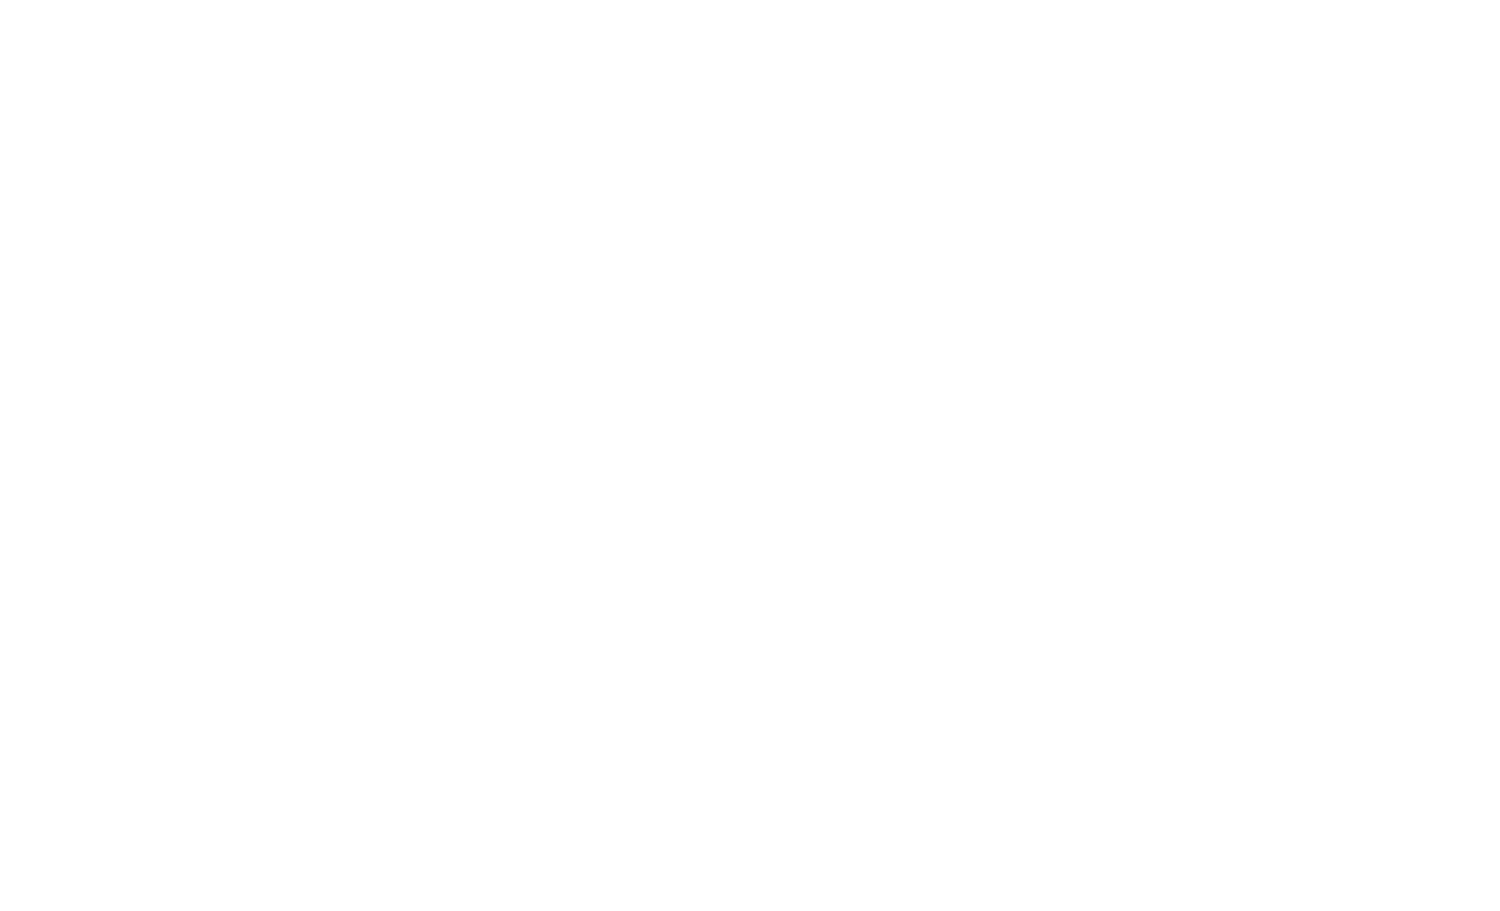 Giant Steps typography